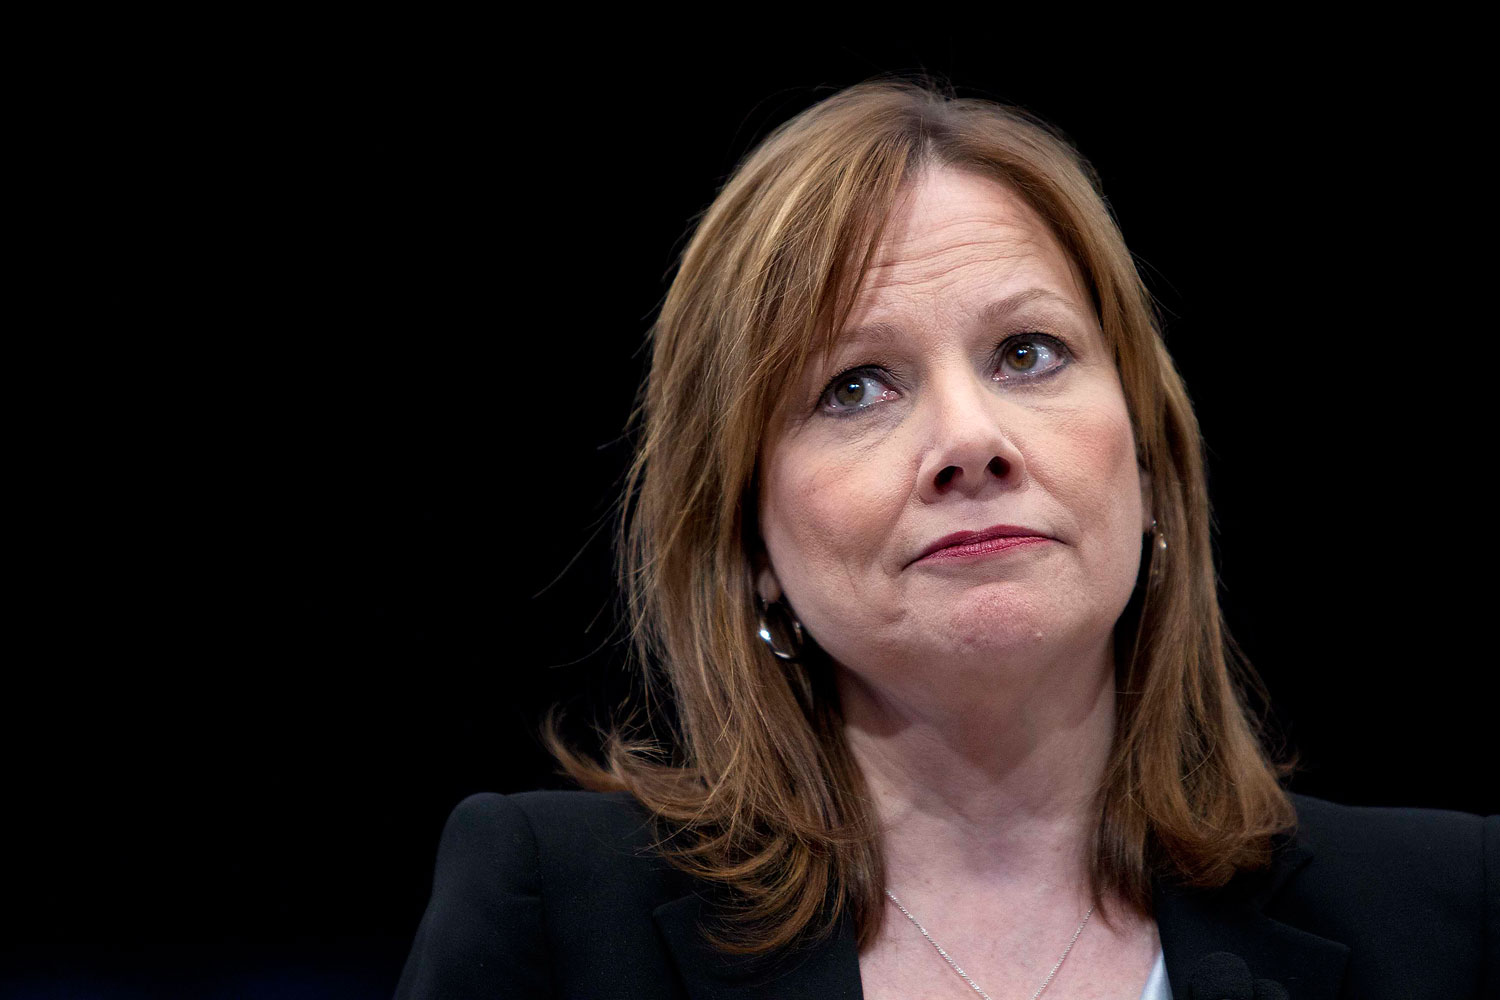 General Motors CEO Mary Barra appears onstage during a launch event for new Chevrolet cars before the New York Auto Show in New York April 15, 2014.